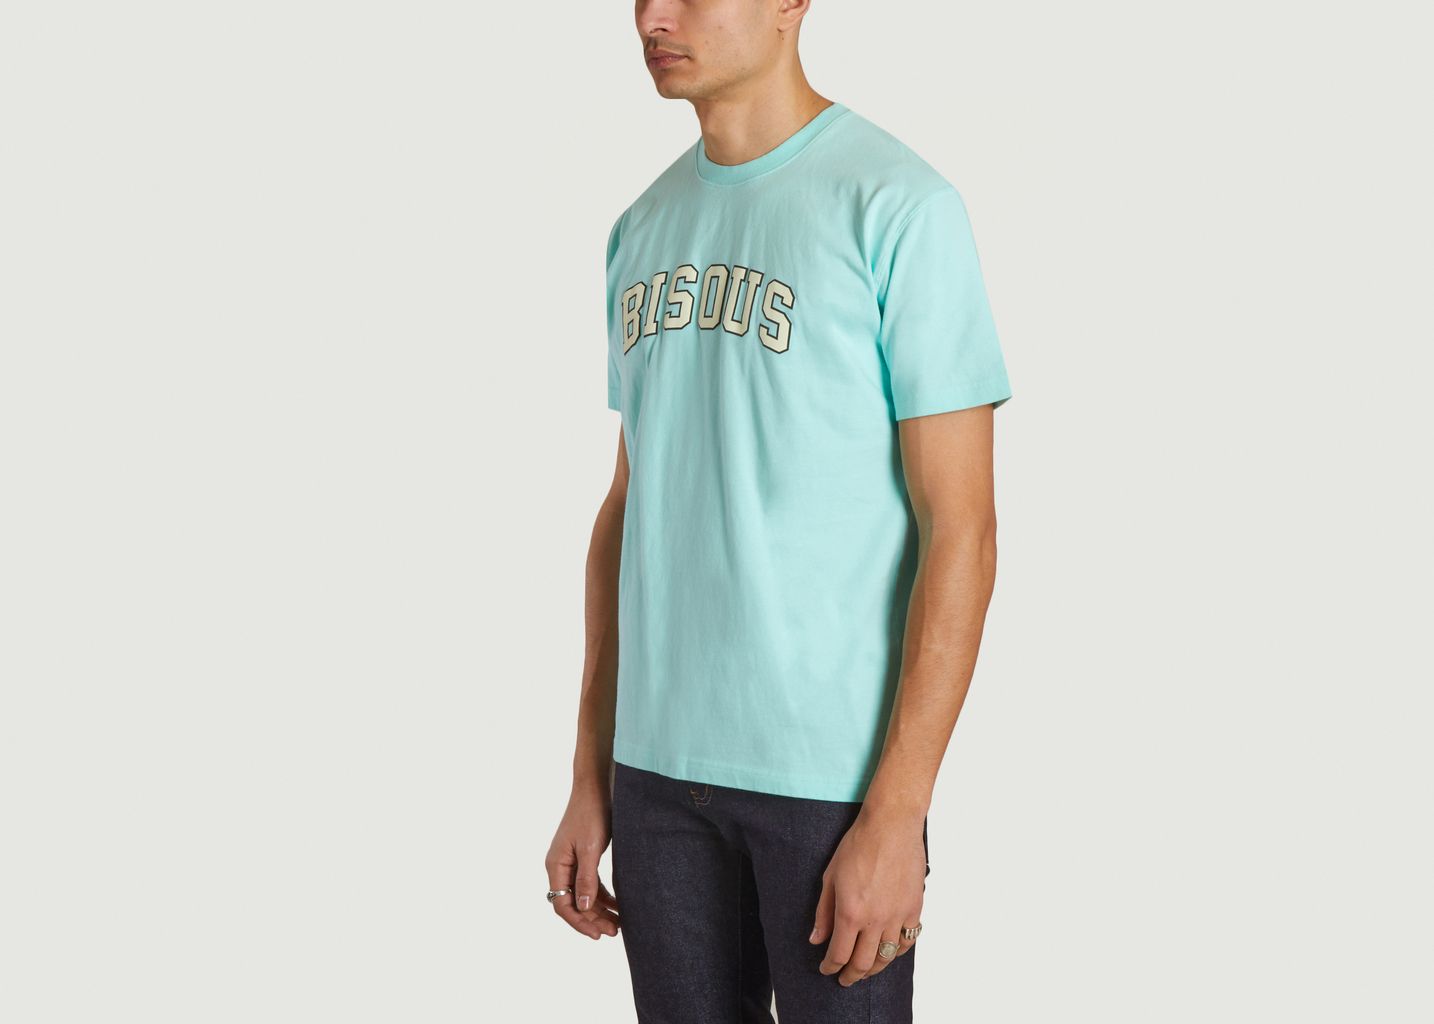 College T-shirt - Bisous Skateboards